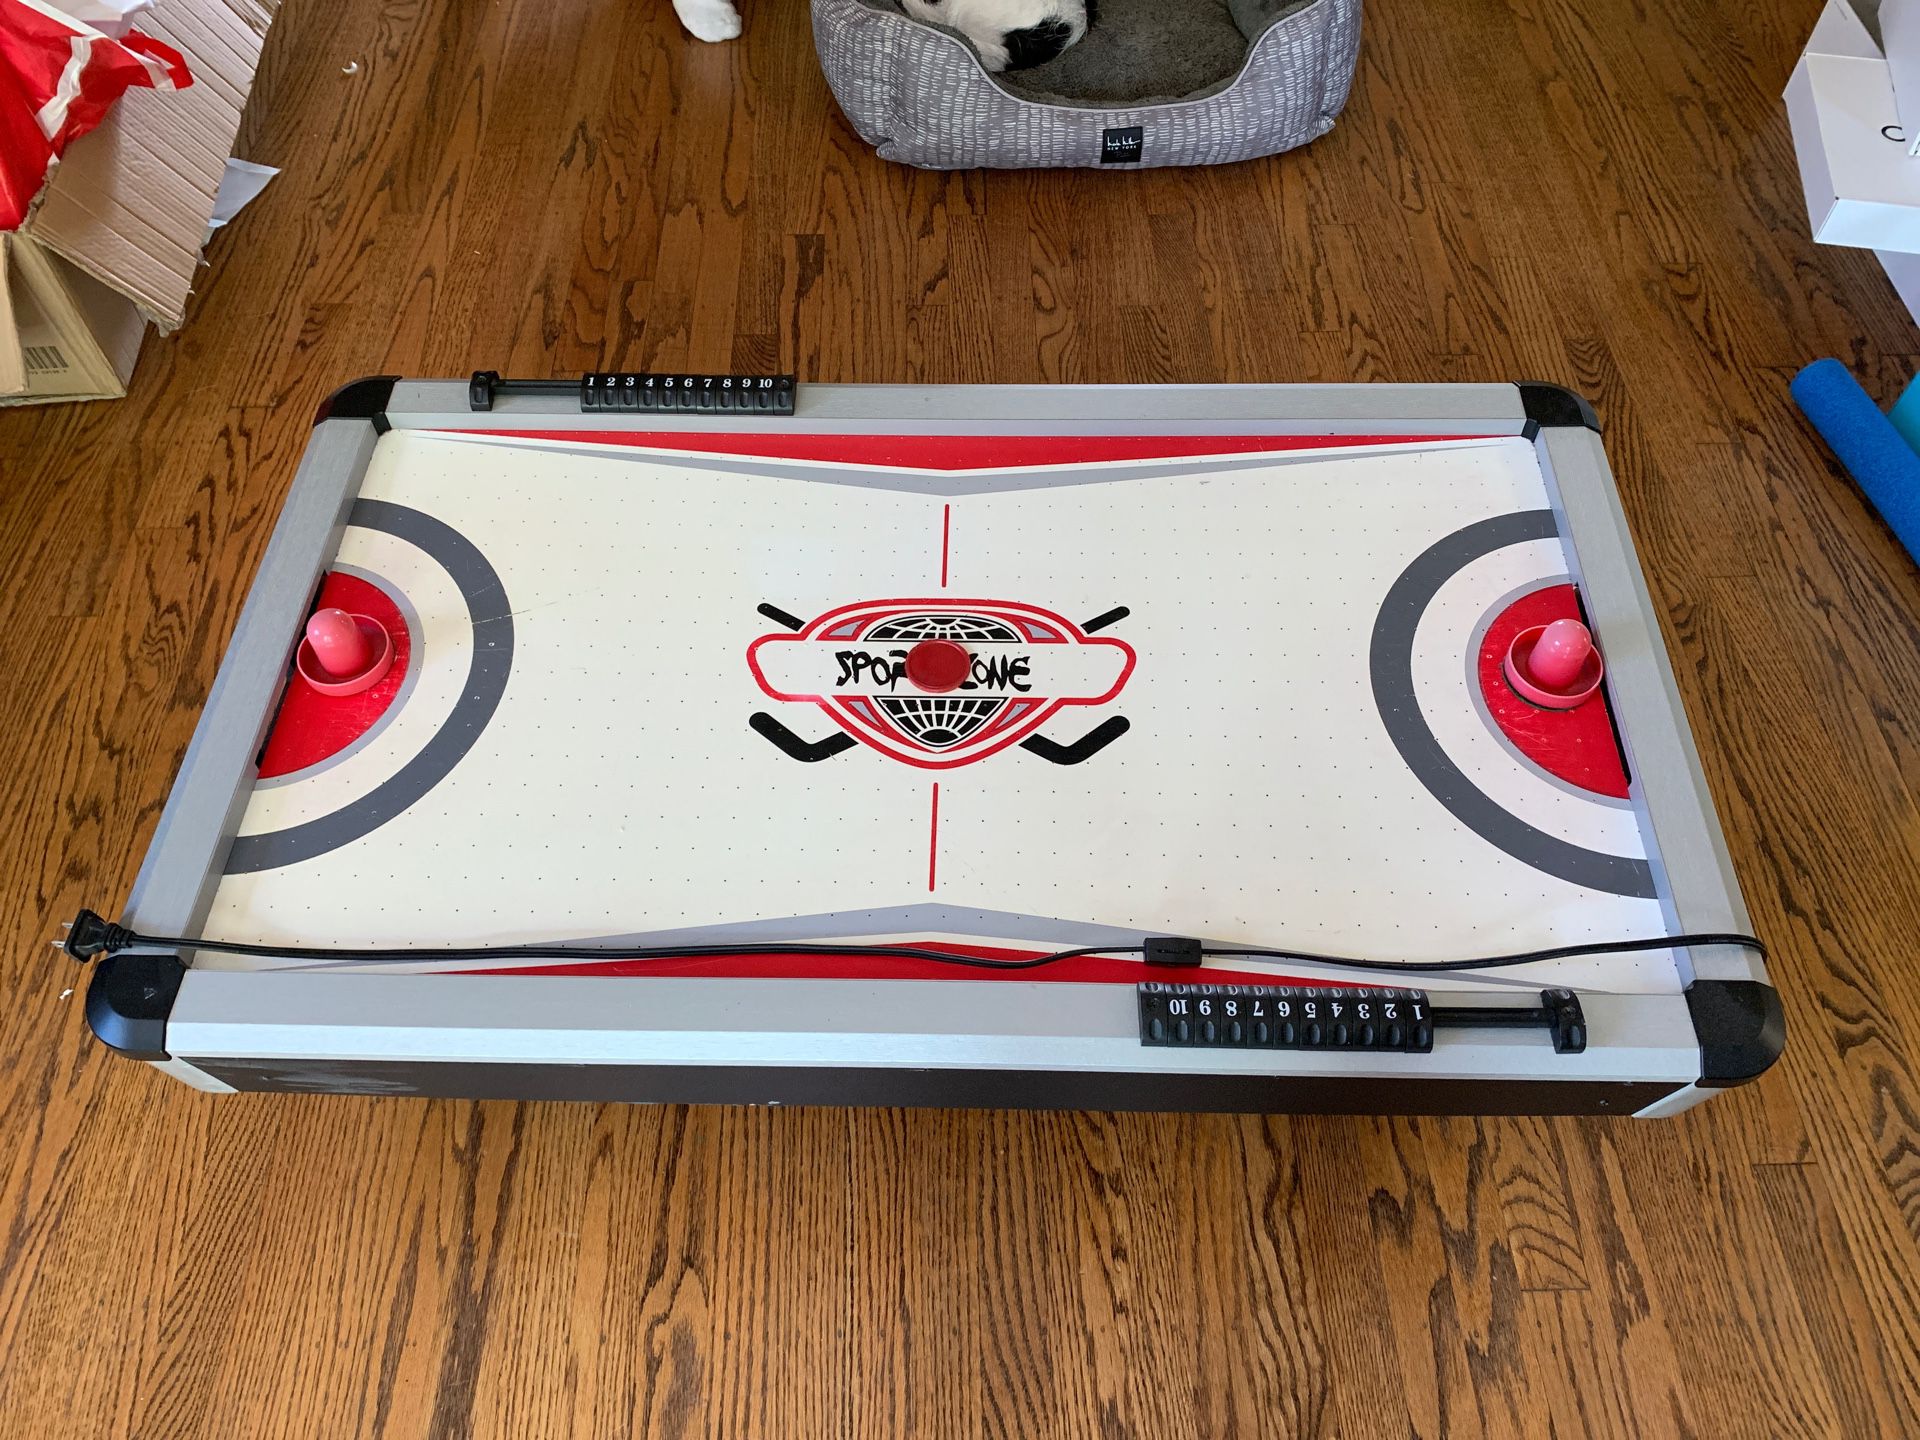 Air Hockey Table - electric, table-top - great condition & fun